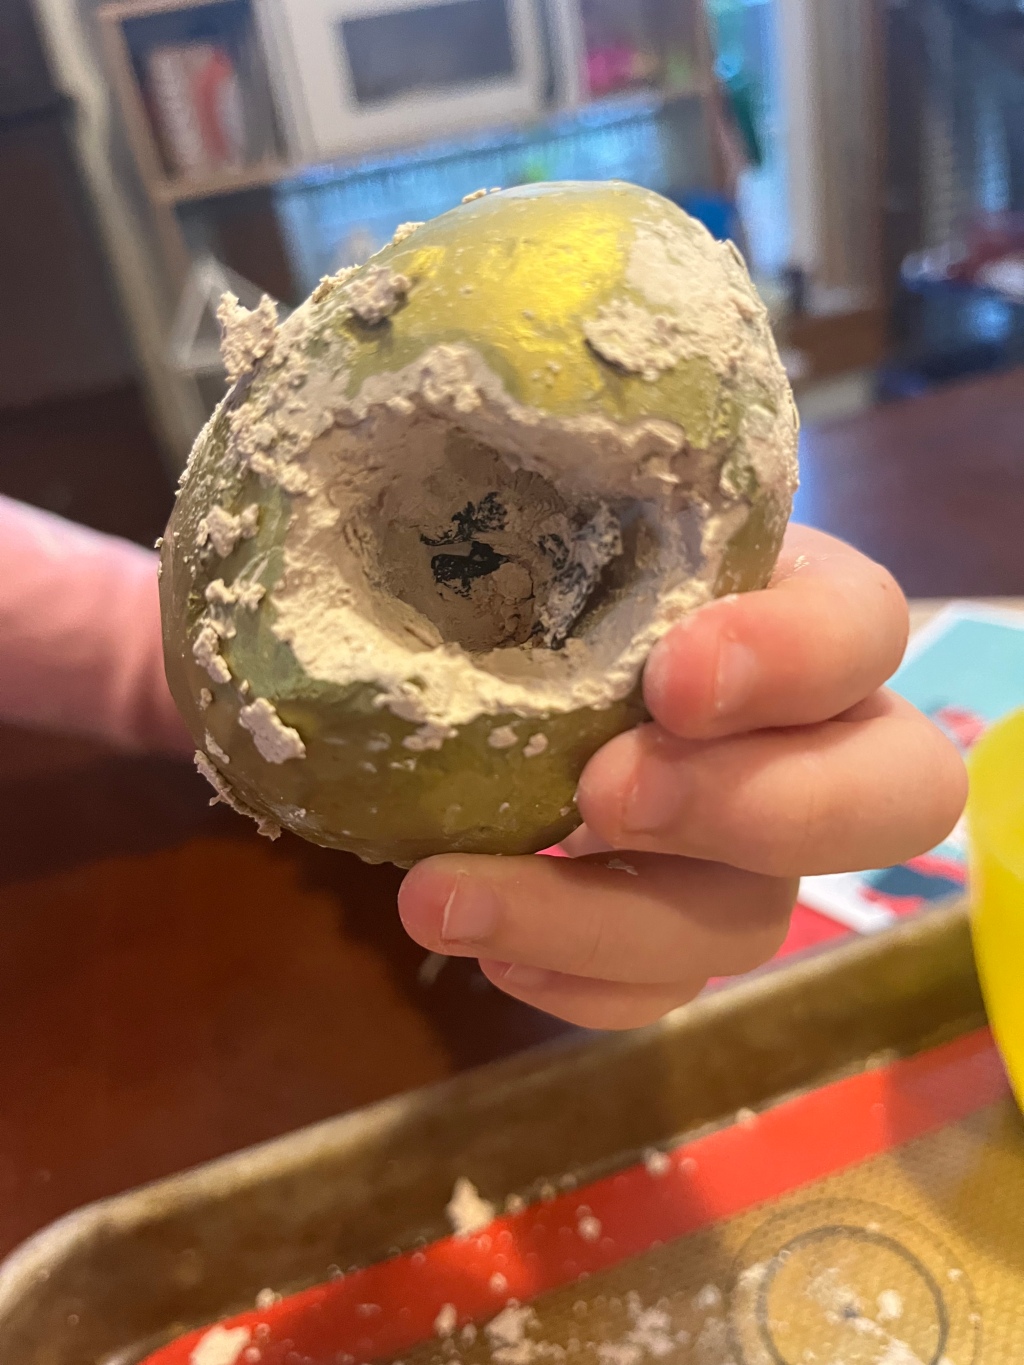 Dig It Up! Discoveries Dragon Egg from MindWare partially excavated and hatched